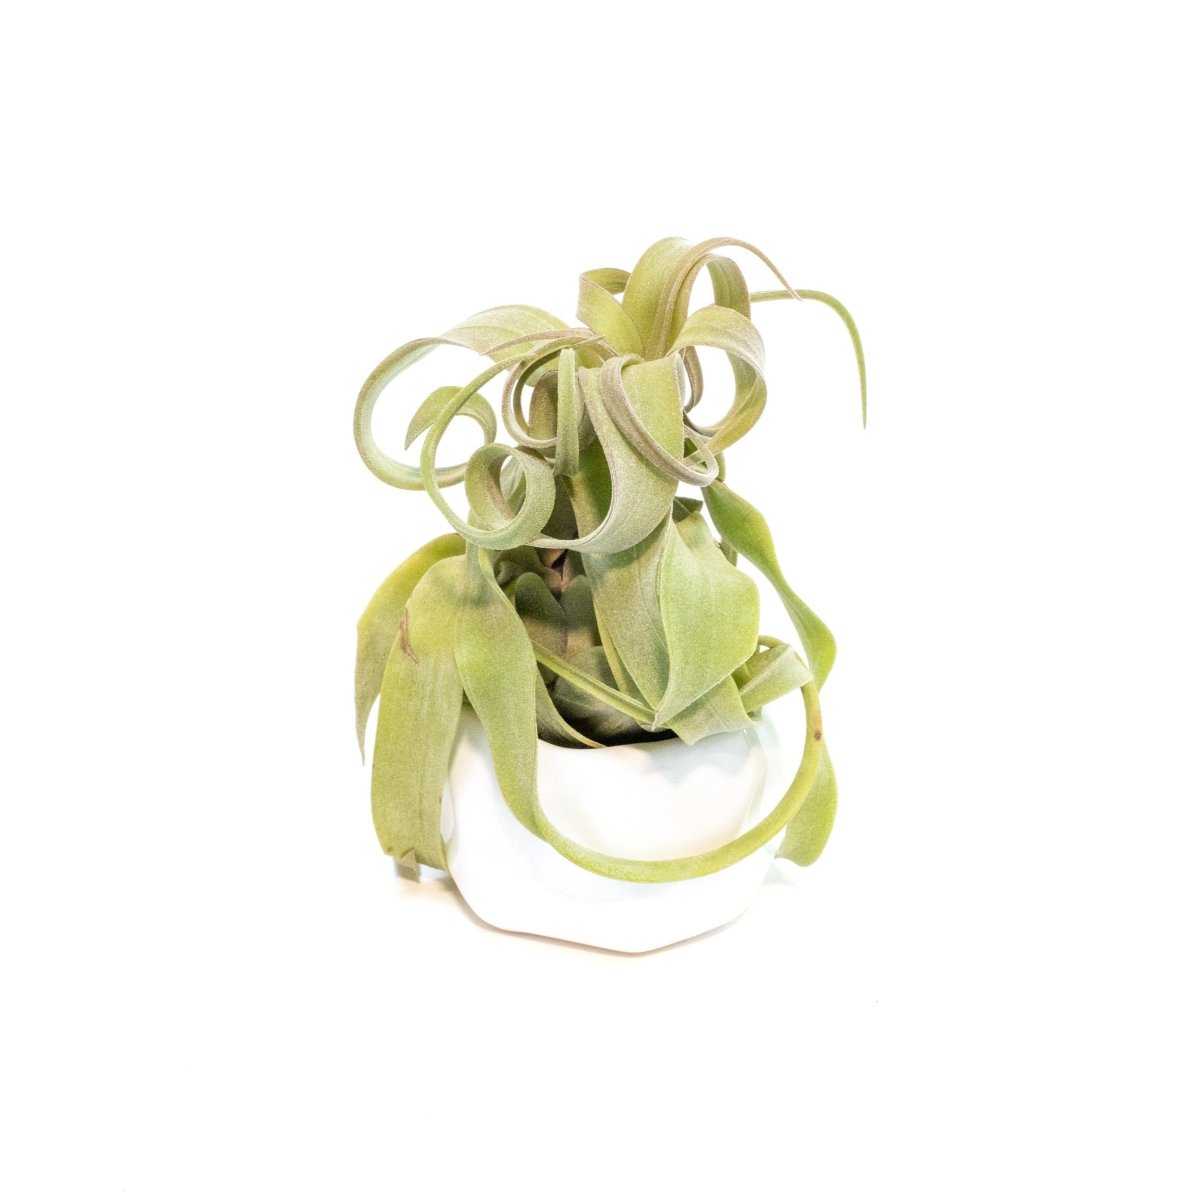 Air Plant Supply Co. White Geometric Ceramic Container with Premium Tillandsia Air Plant - lily & onyx